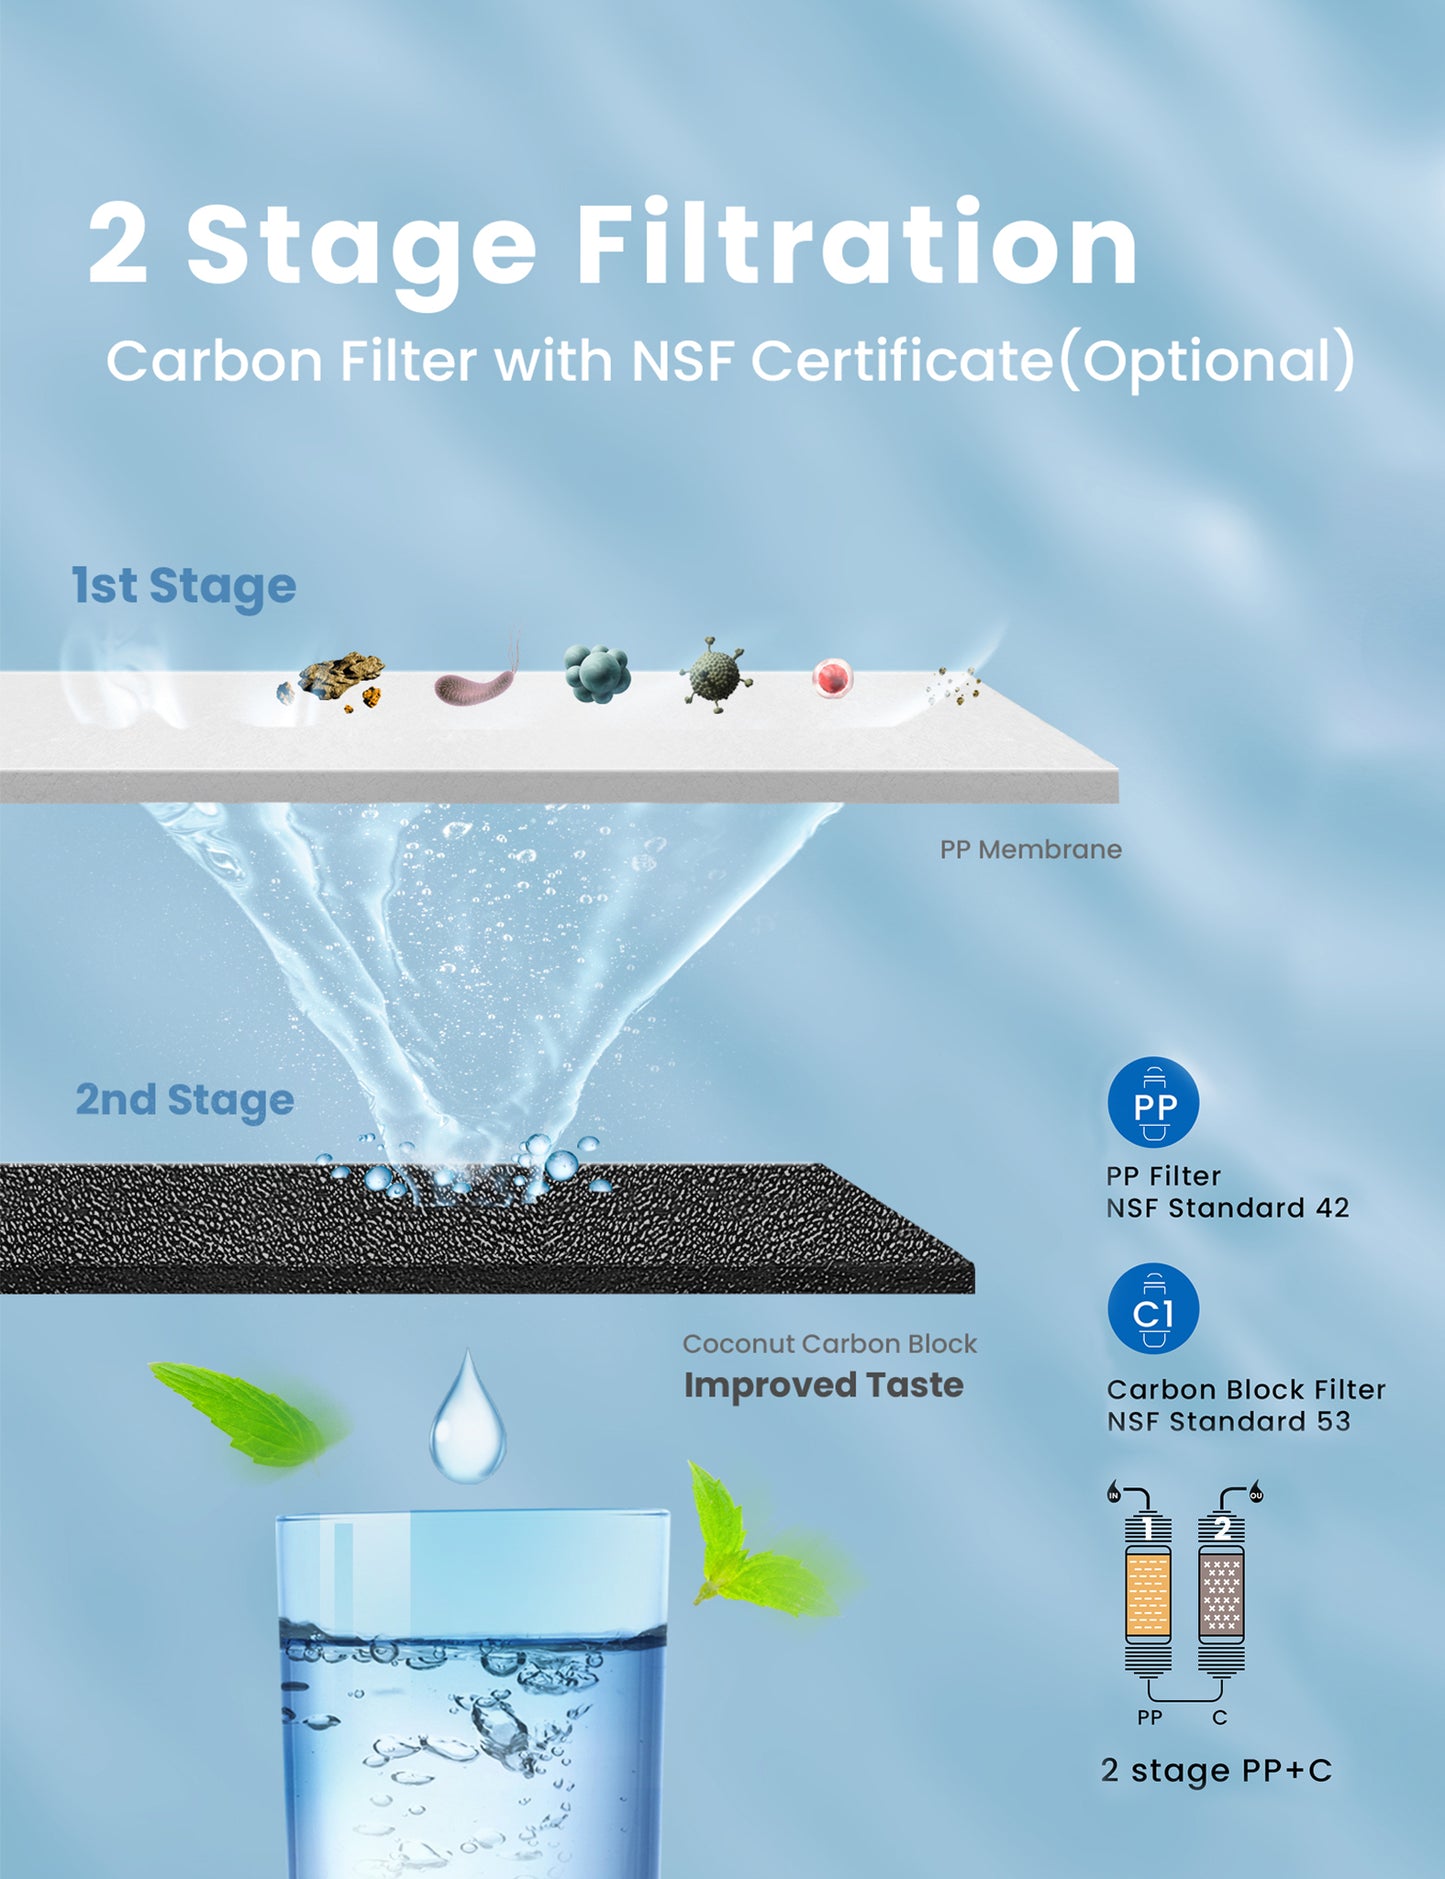 how the filter cartridge performs filtration